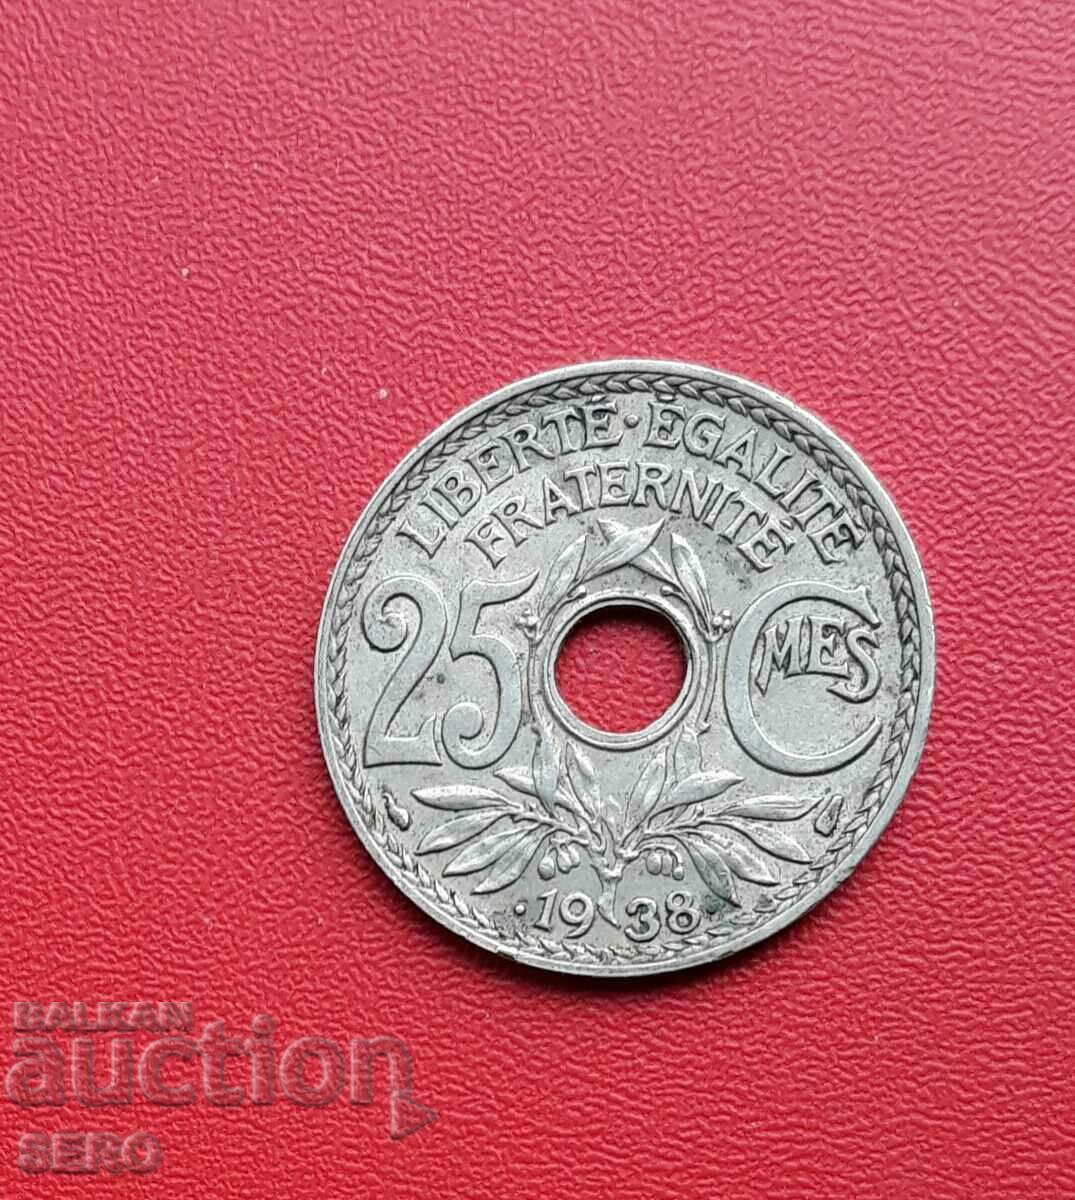 France-25 cents 1938